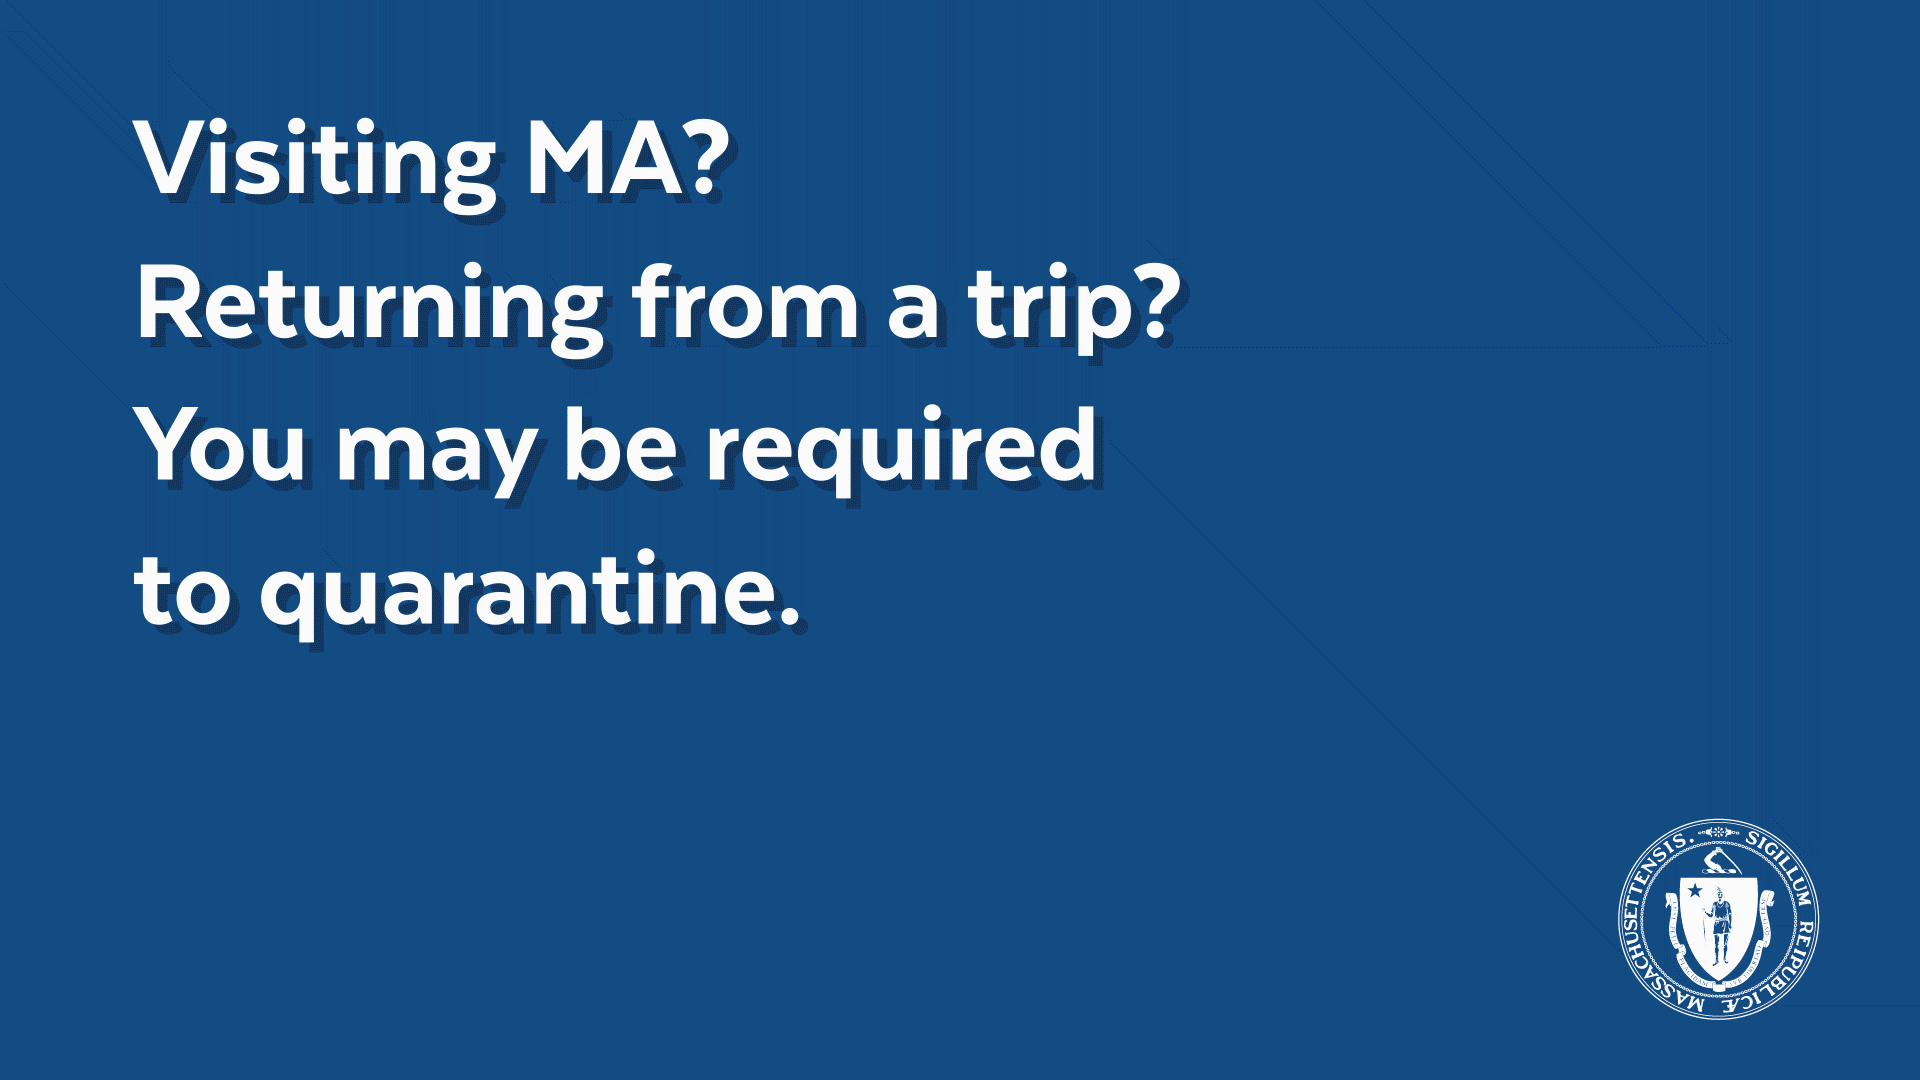 Visiting MA? Returning from a trip? You may be required to quarantine.